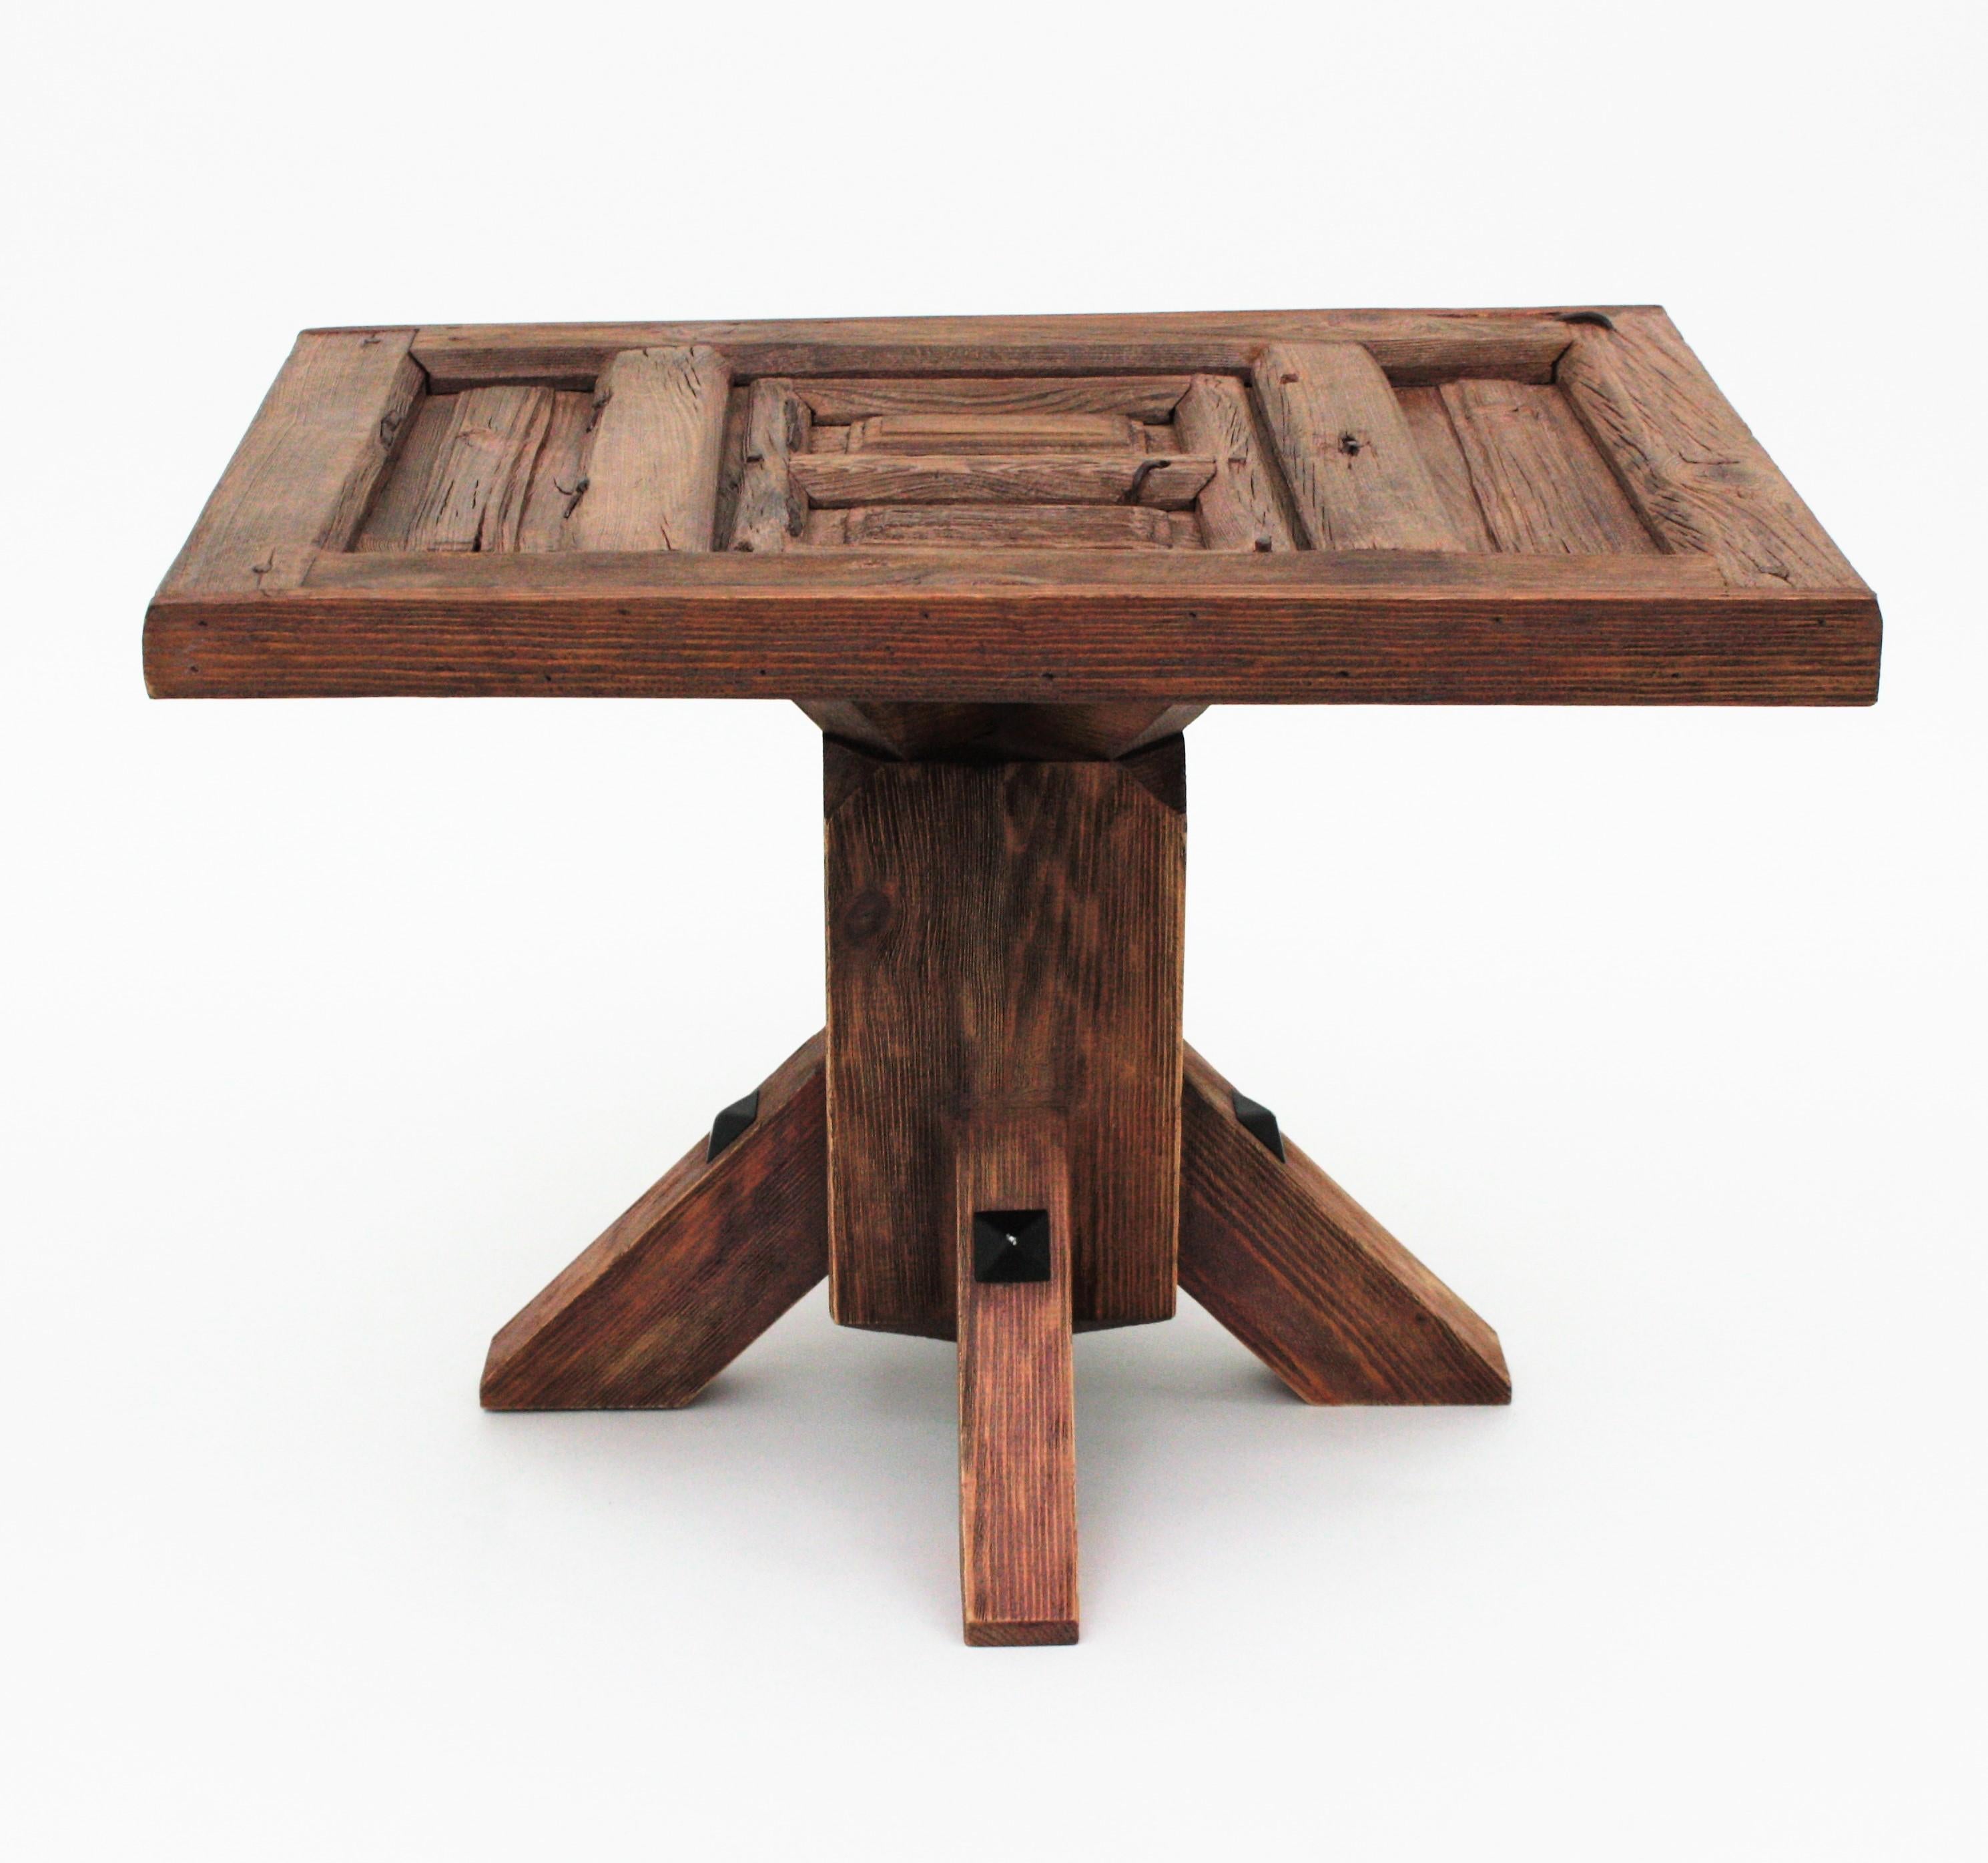 Wood Antique Spanish Rustic Coffee Table / Side Table For Sale